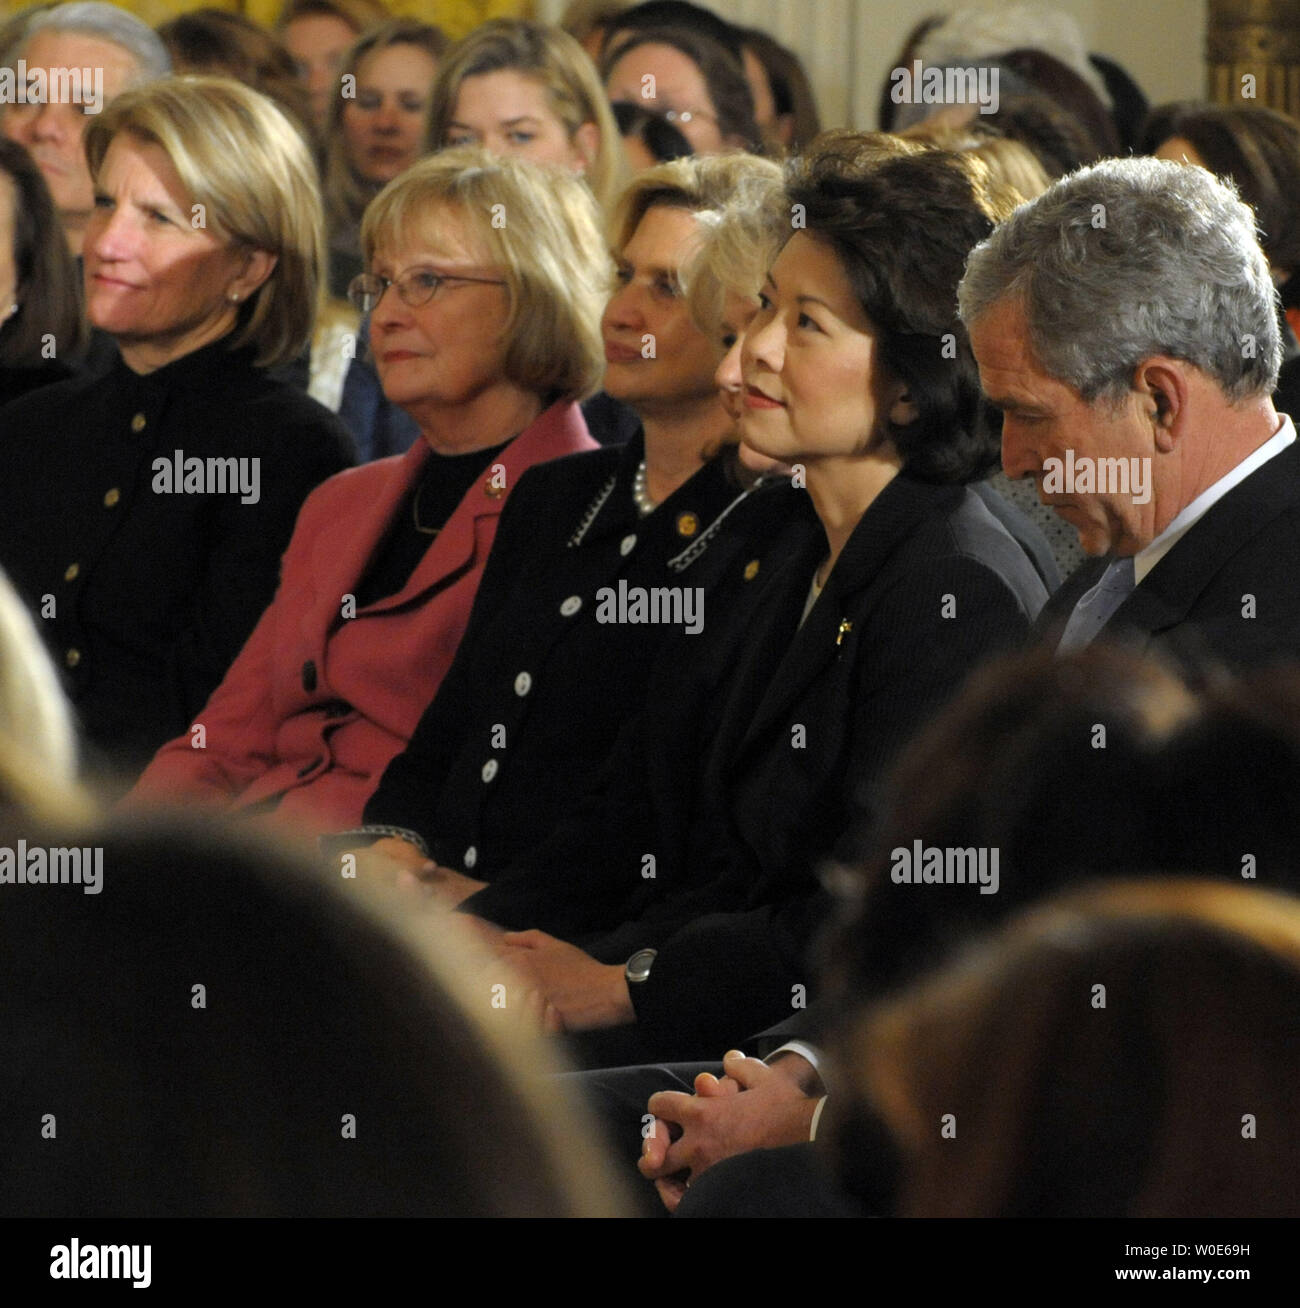 U.S. President George W. Bush listens as First Lady Laura Bush makes Remarks in Honor of Women's History Month and International Women's Day in the East Room of the White House in Washington on March 10, 2008. From left are Rep. Shelley Moore Capito, R-WV, Rep. Judy Bigger, R-IL, Rep. Carolyn Maloney, D-NY, Transportation Secretary Mary E. Peters, Labor Secretary Elaine Chao and Bush.  (UPI Photo/Roger L. Wollenberg) Stock Photo